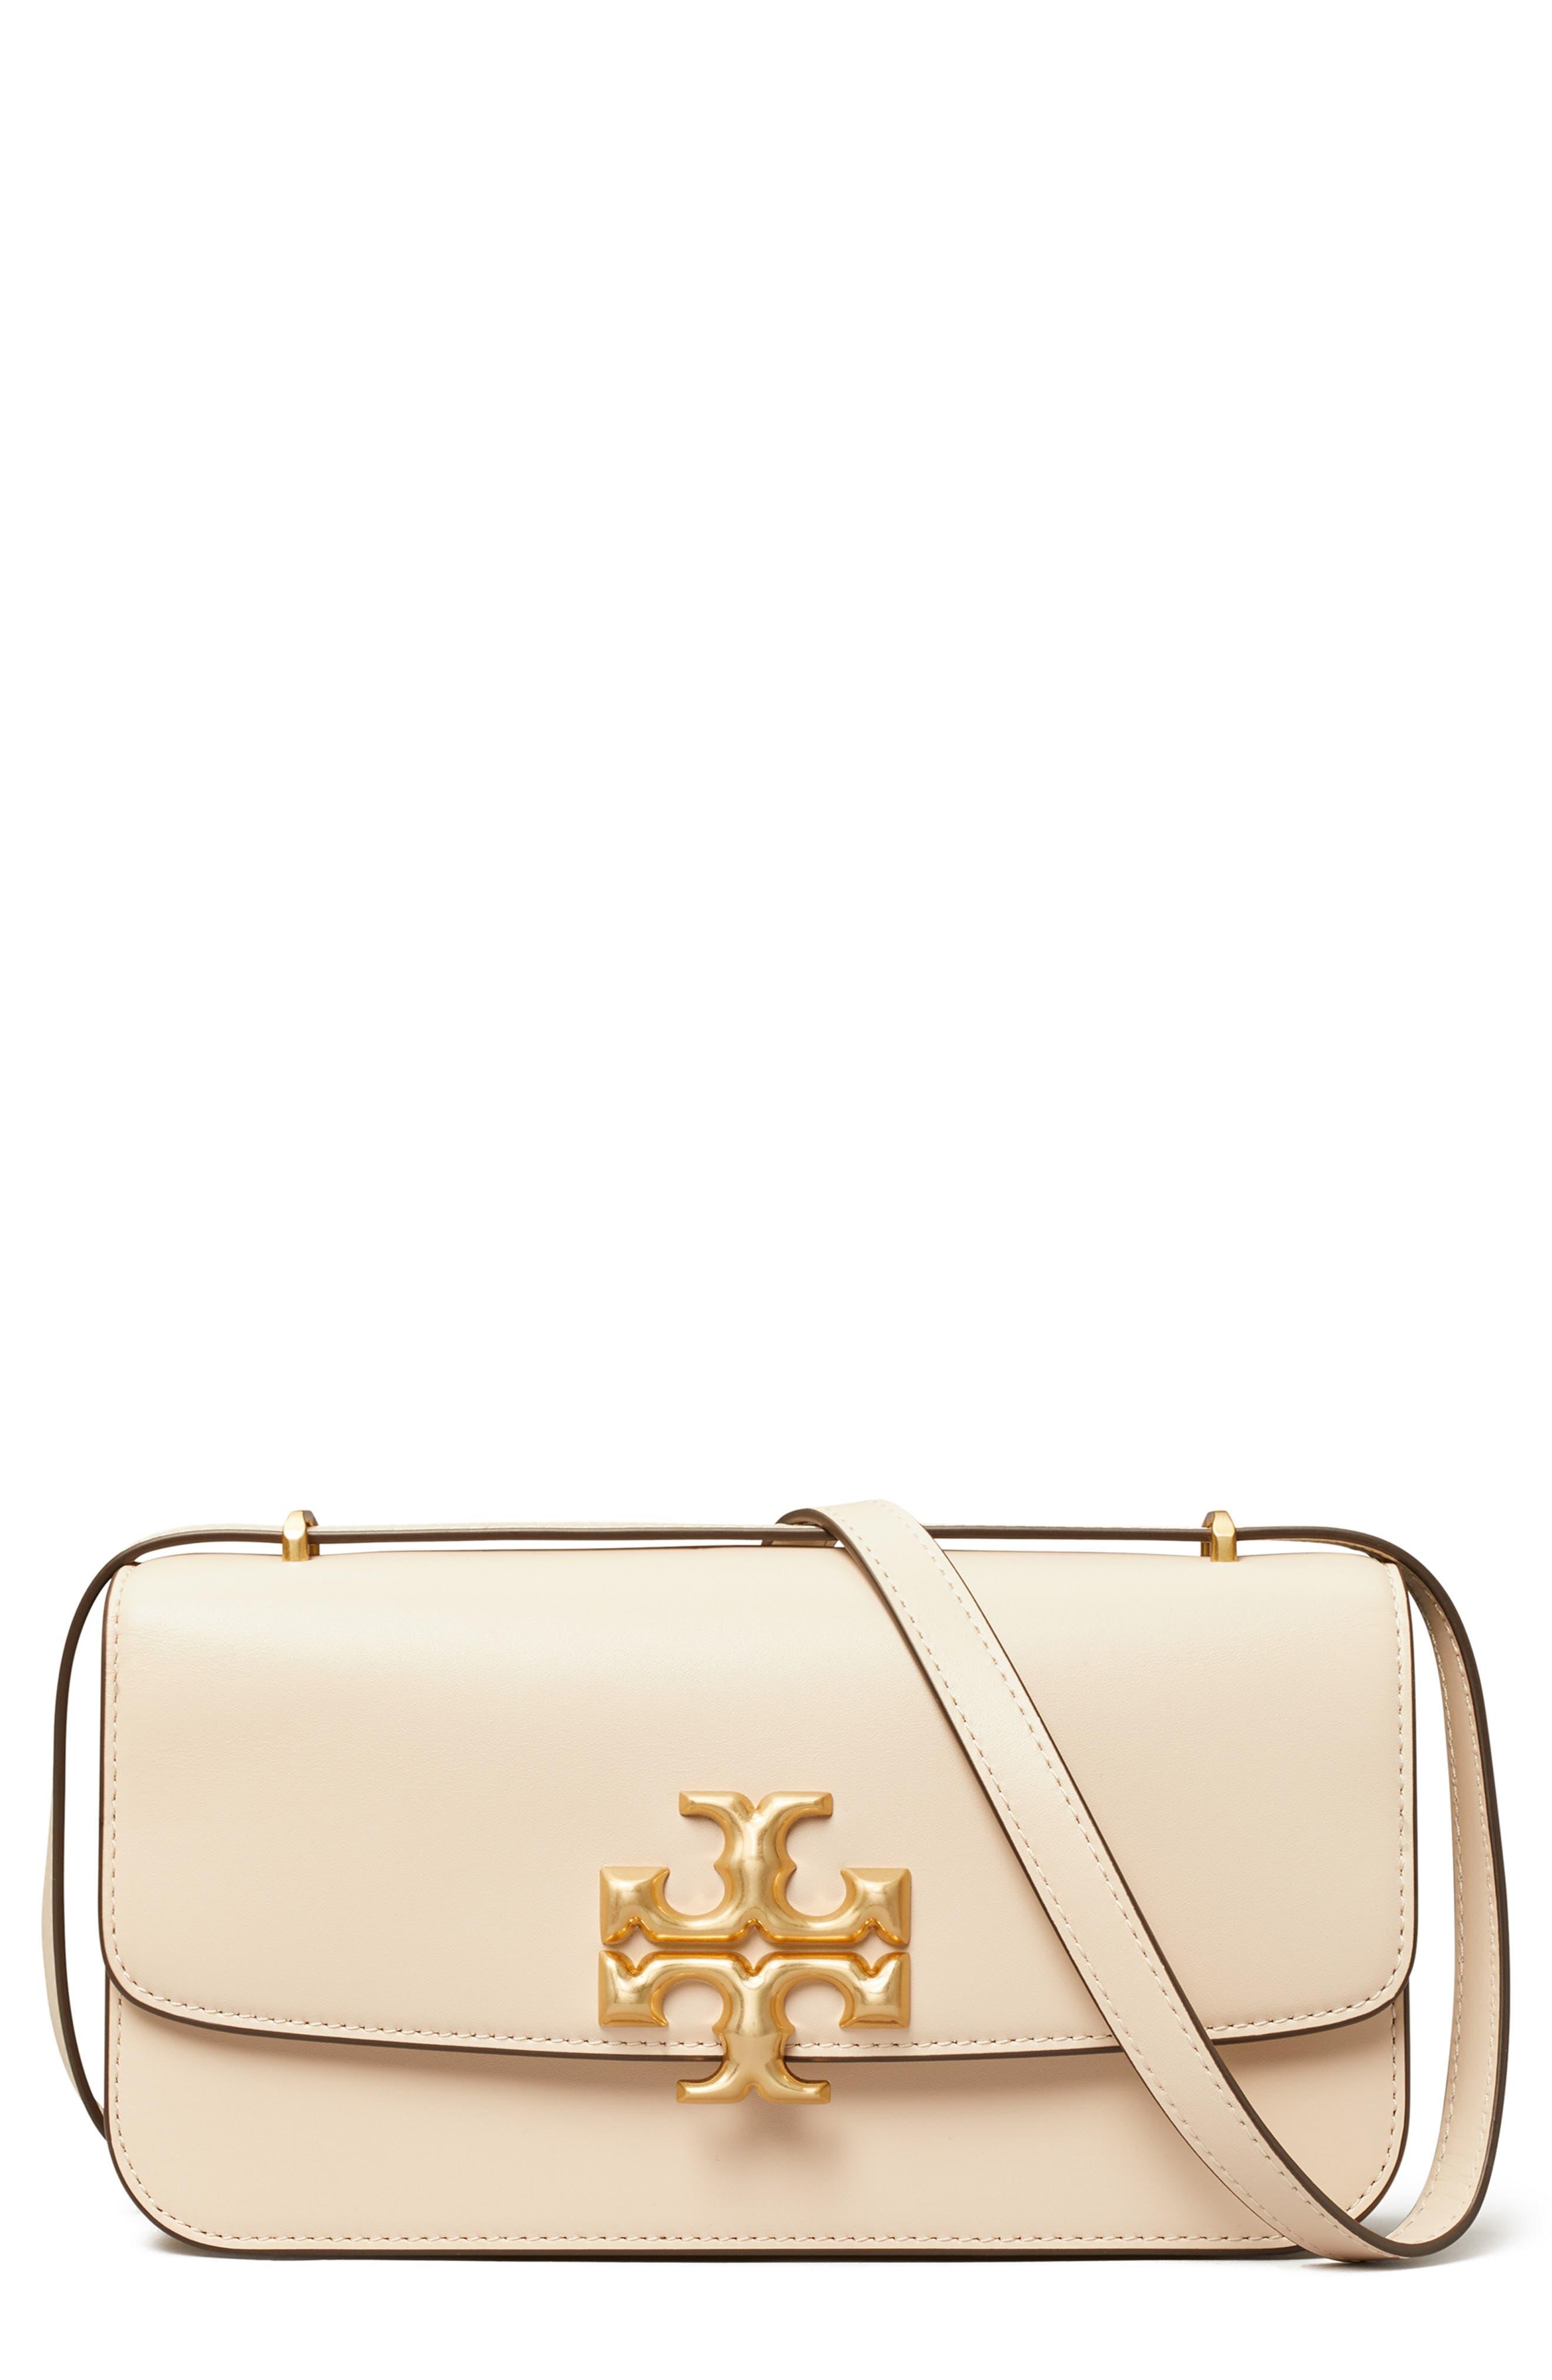 Tory Burch Small Eleanor Rectangular Convertible Leather Shoulder Bag in  Natural | Lyst